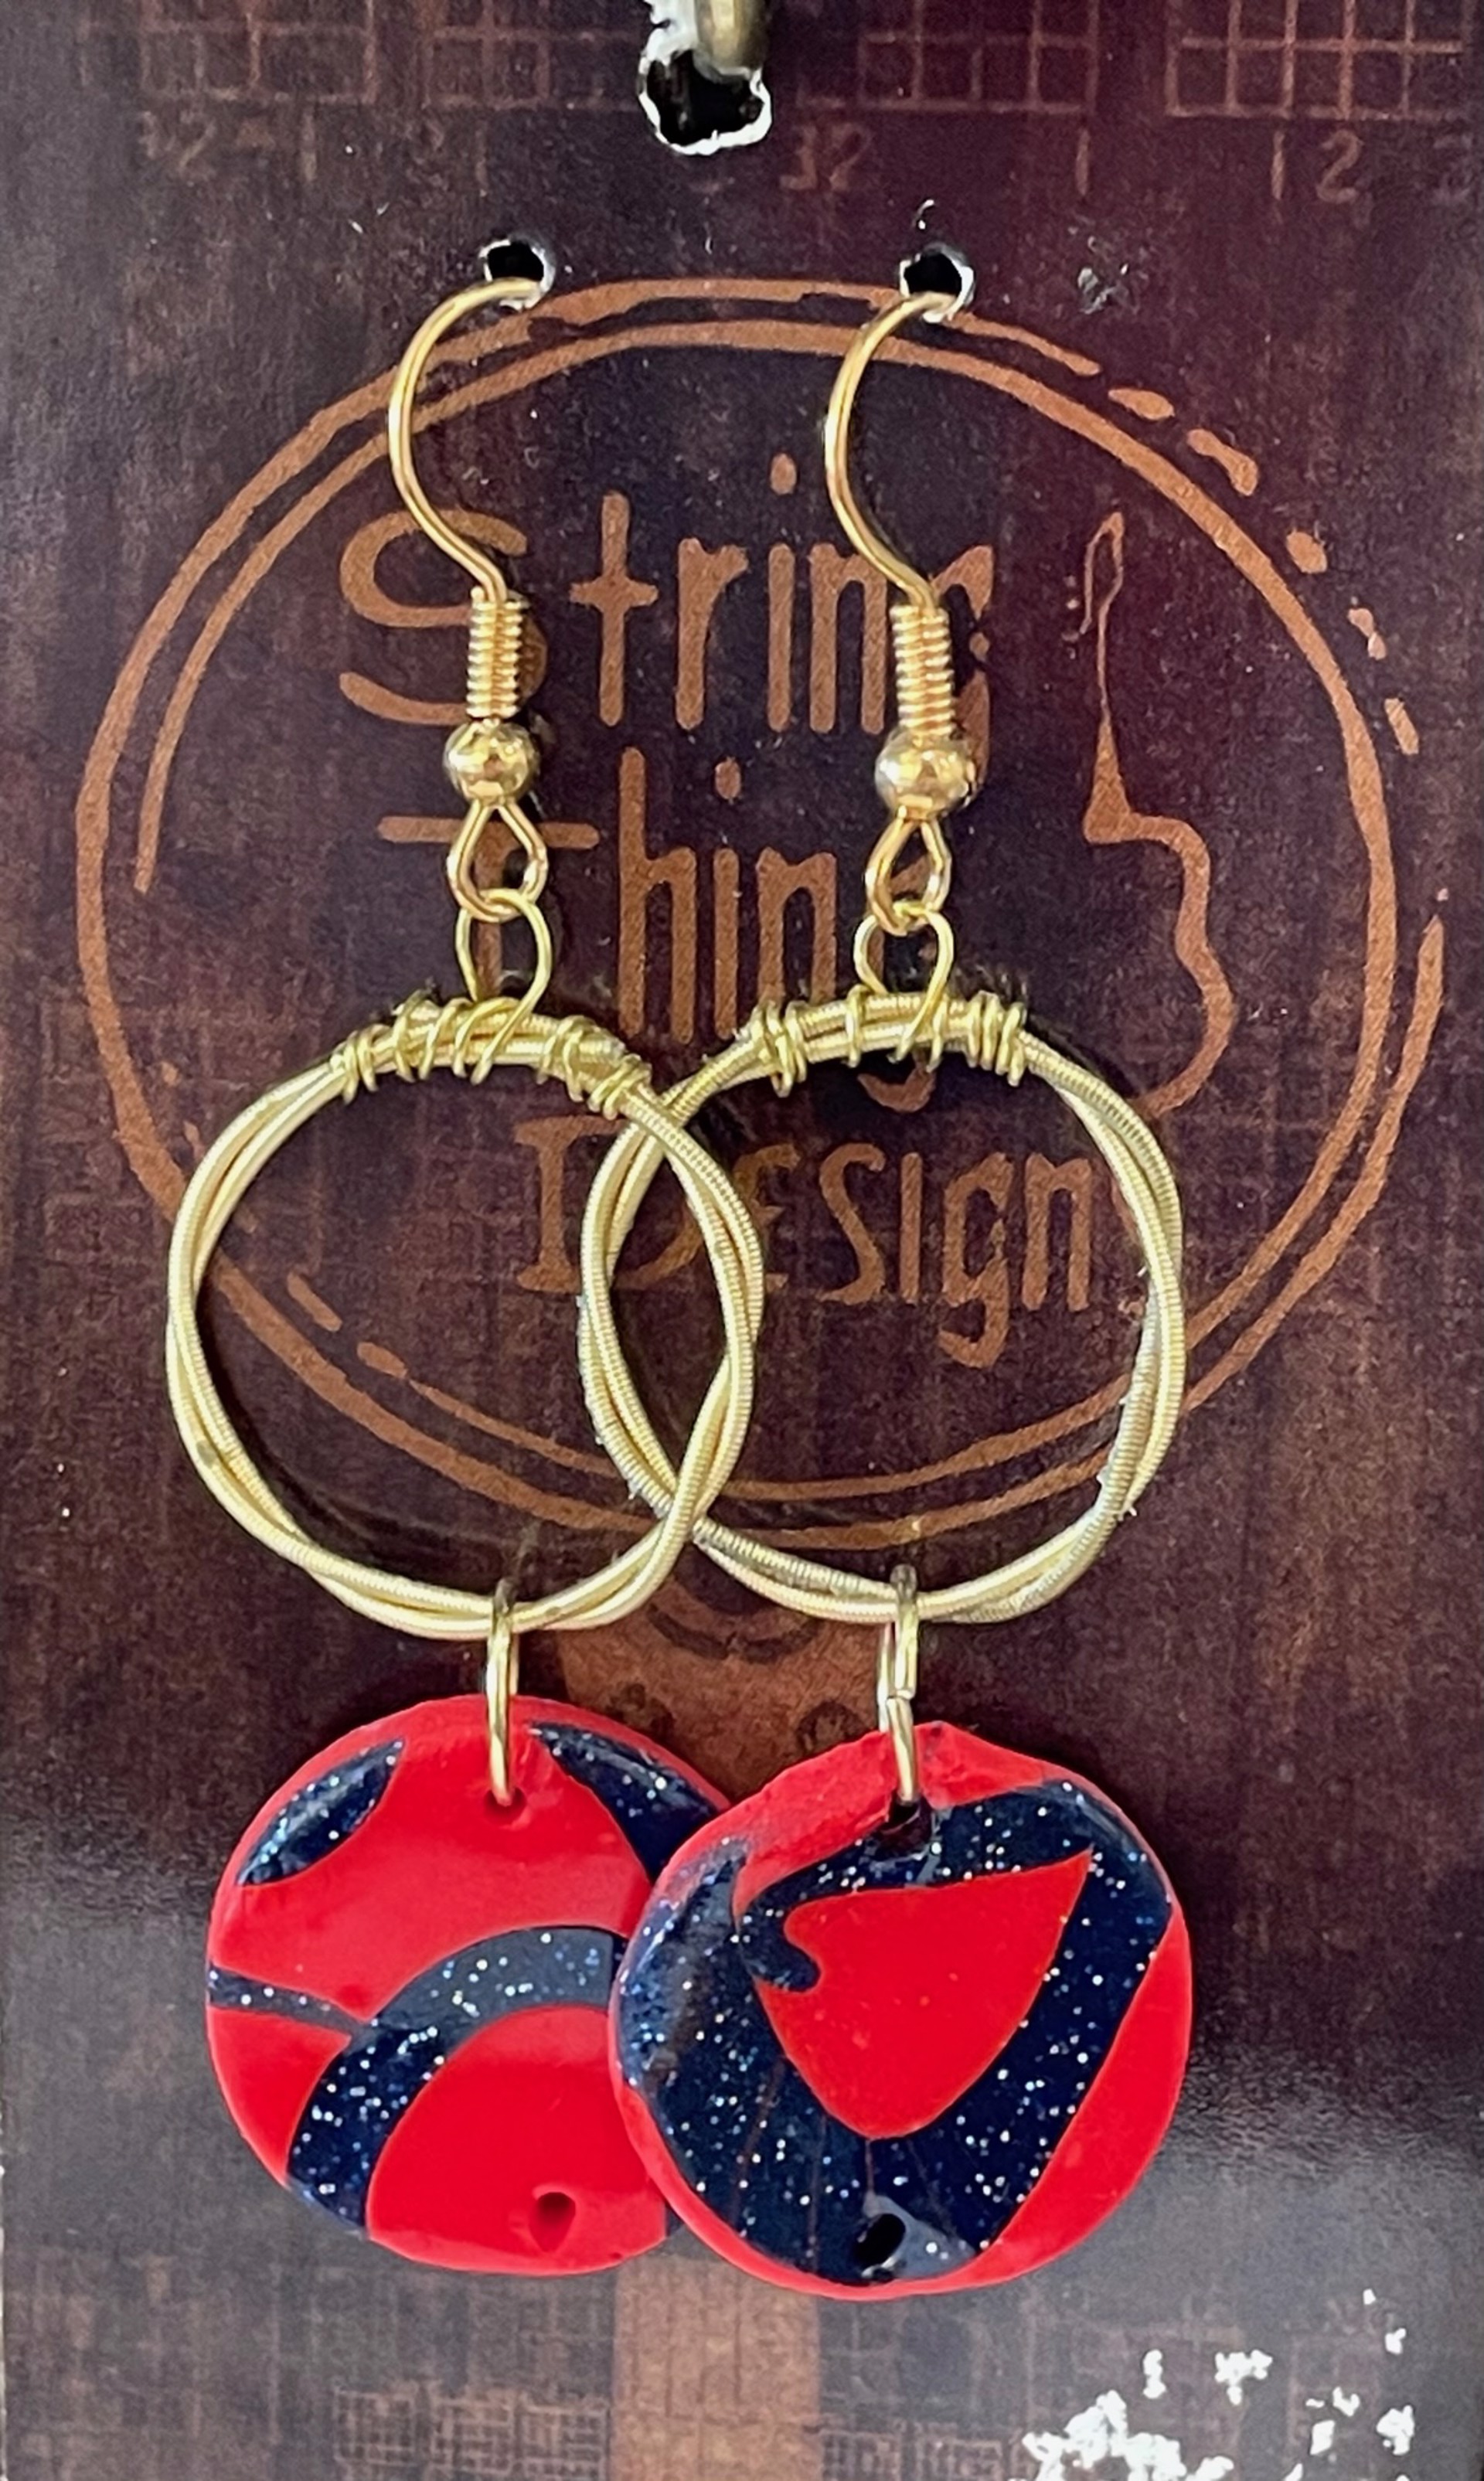 Red and Black Clay Guitar String Earrings by String Thing Designs